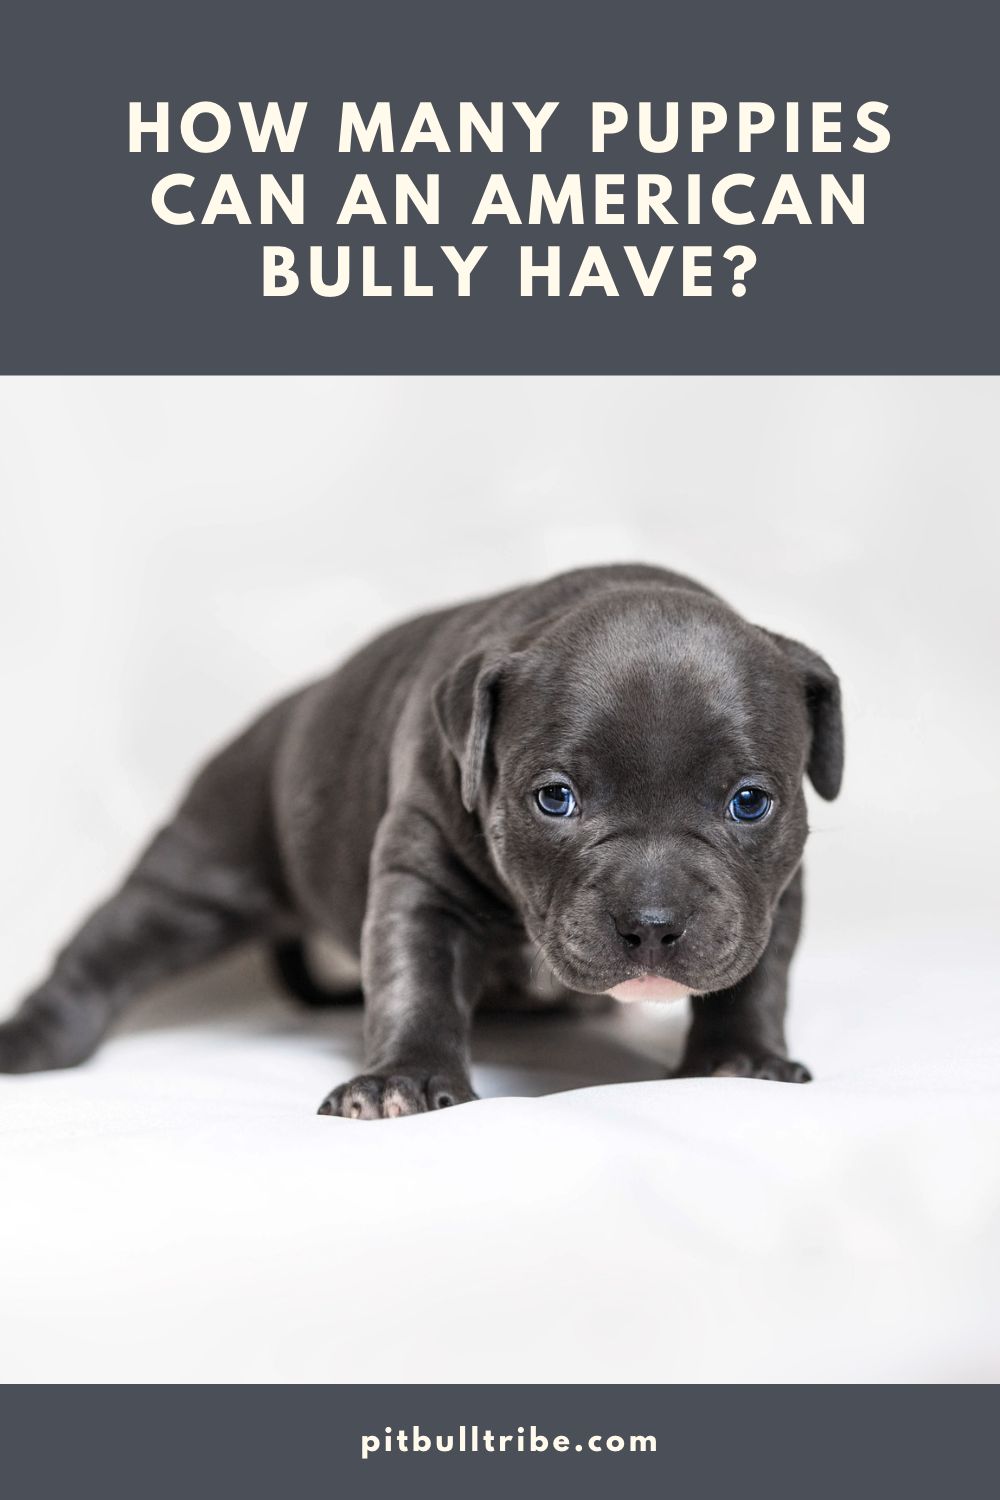 How Many Puppies Can An American Bully Have? - PitBullTribe.com